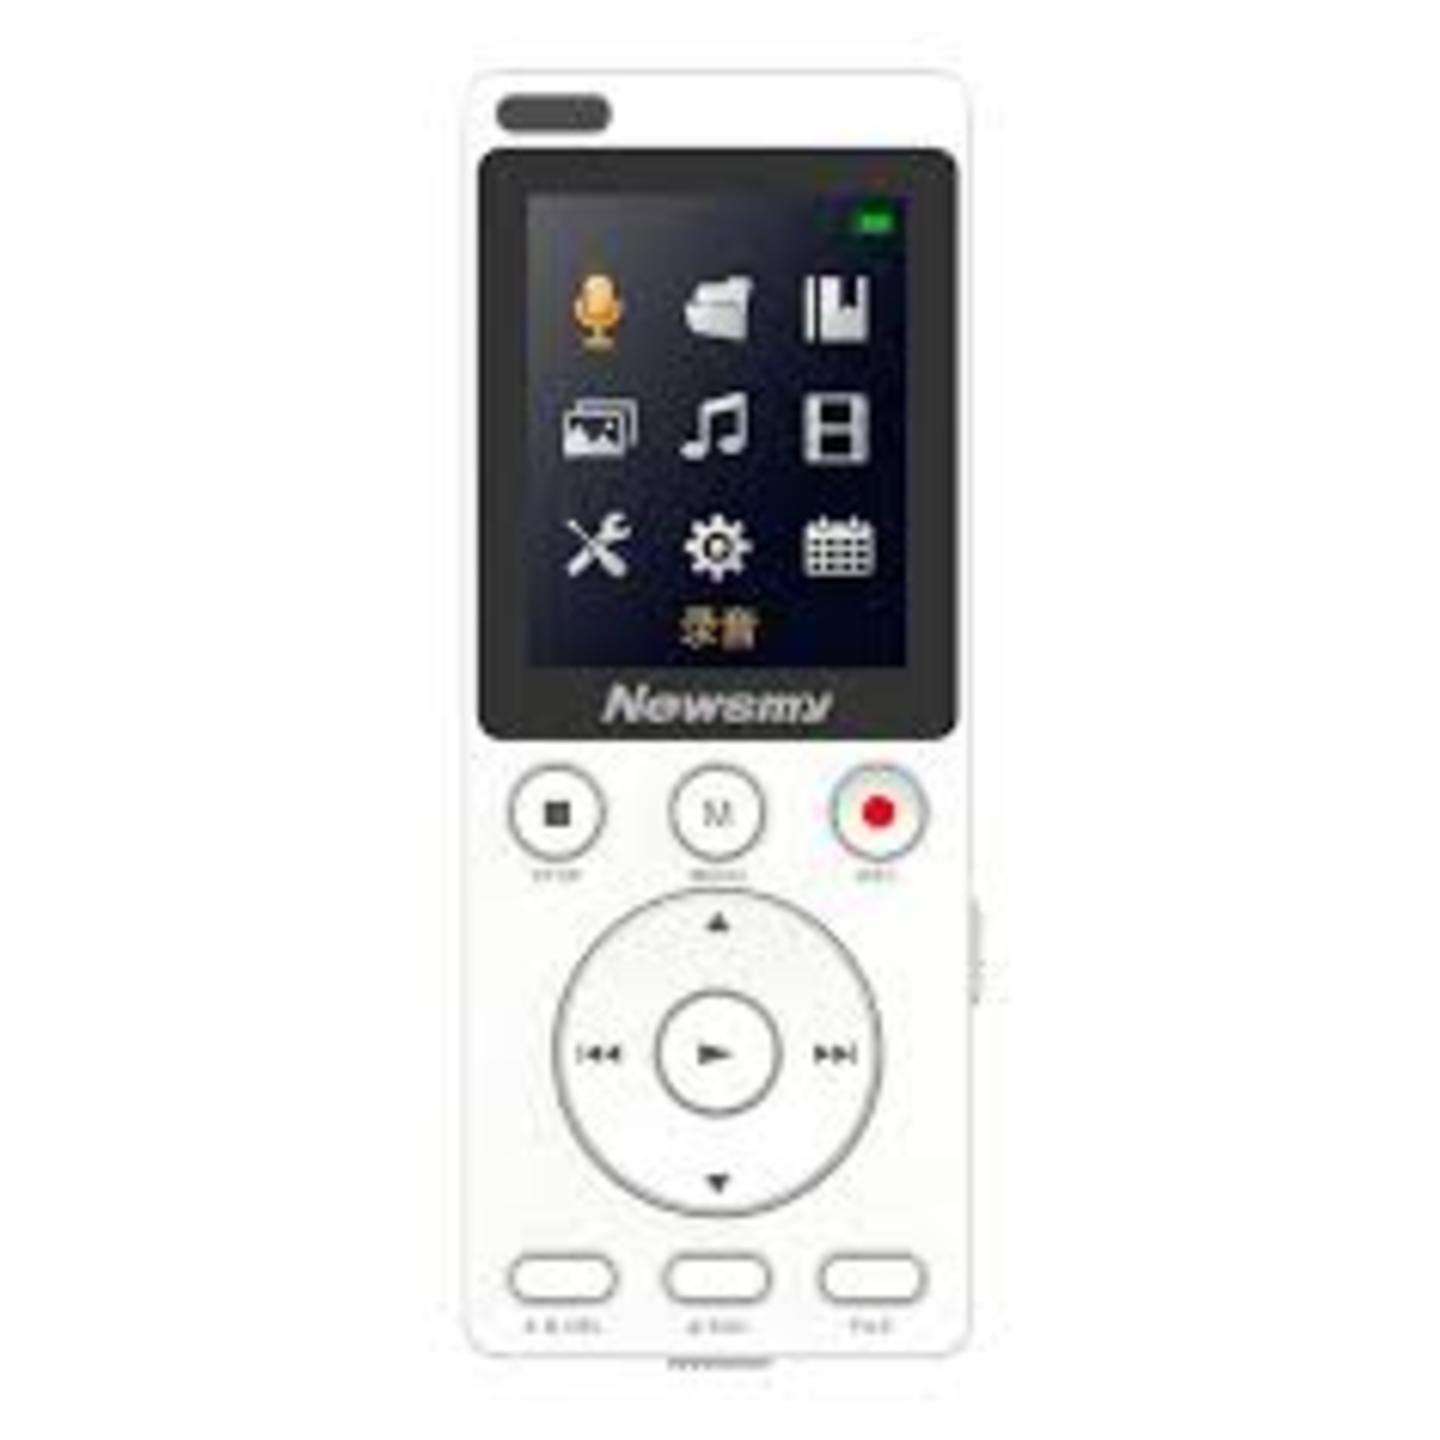 Newsmy RV35 8GB Digital Recorder & MP3 Player with speakers